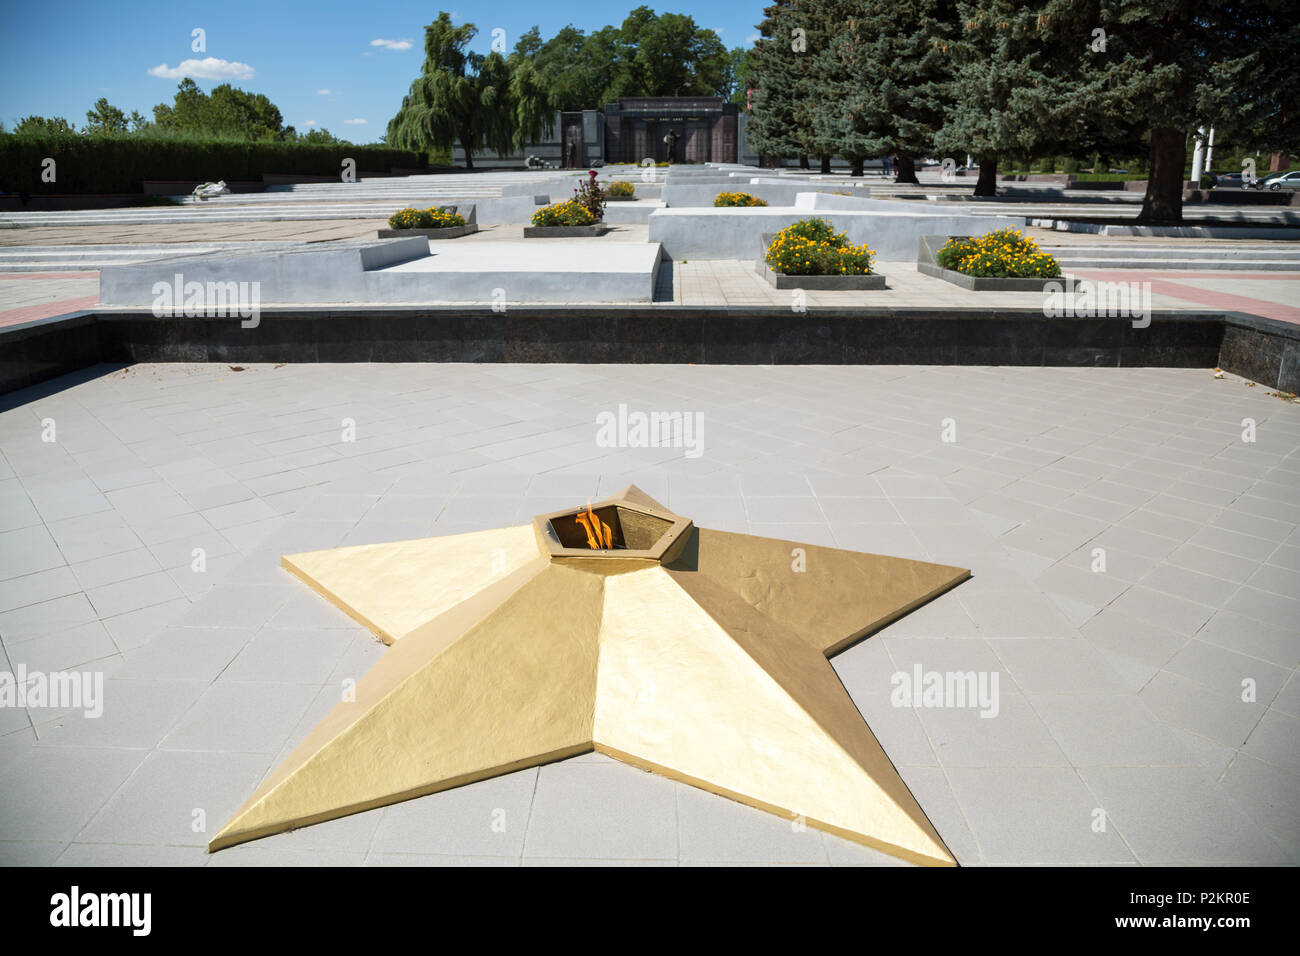 25.08.2016, Tiraspol, Transnistria, Moldova - (Eternal Flame in the form of a Sovietstern) in the center of the city, which was originally established Stock Photo